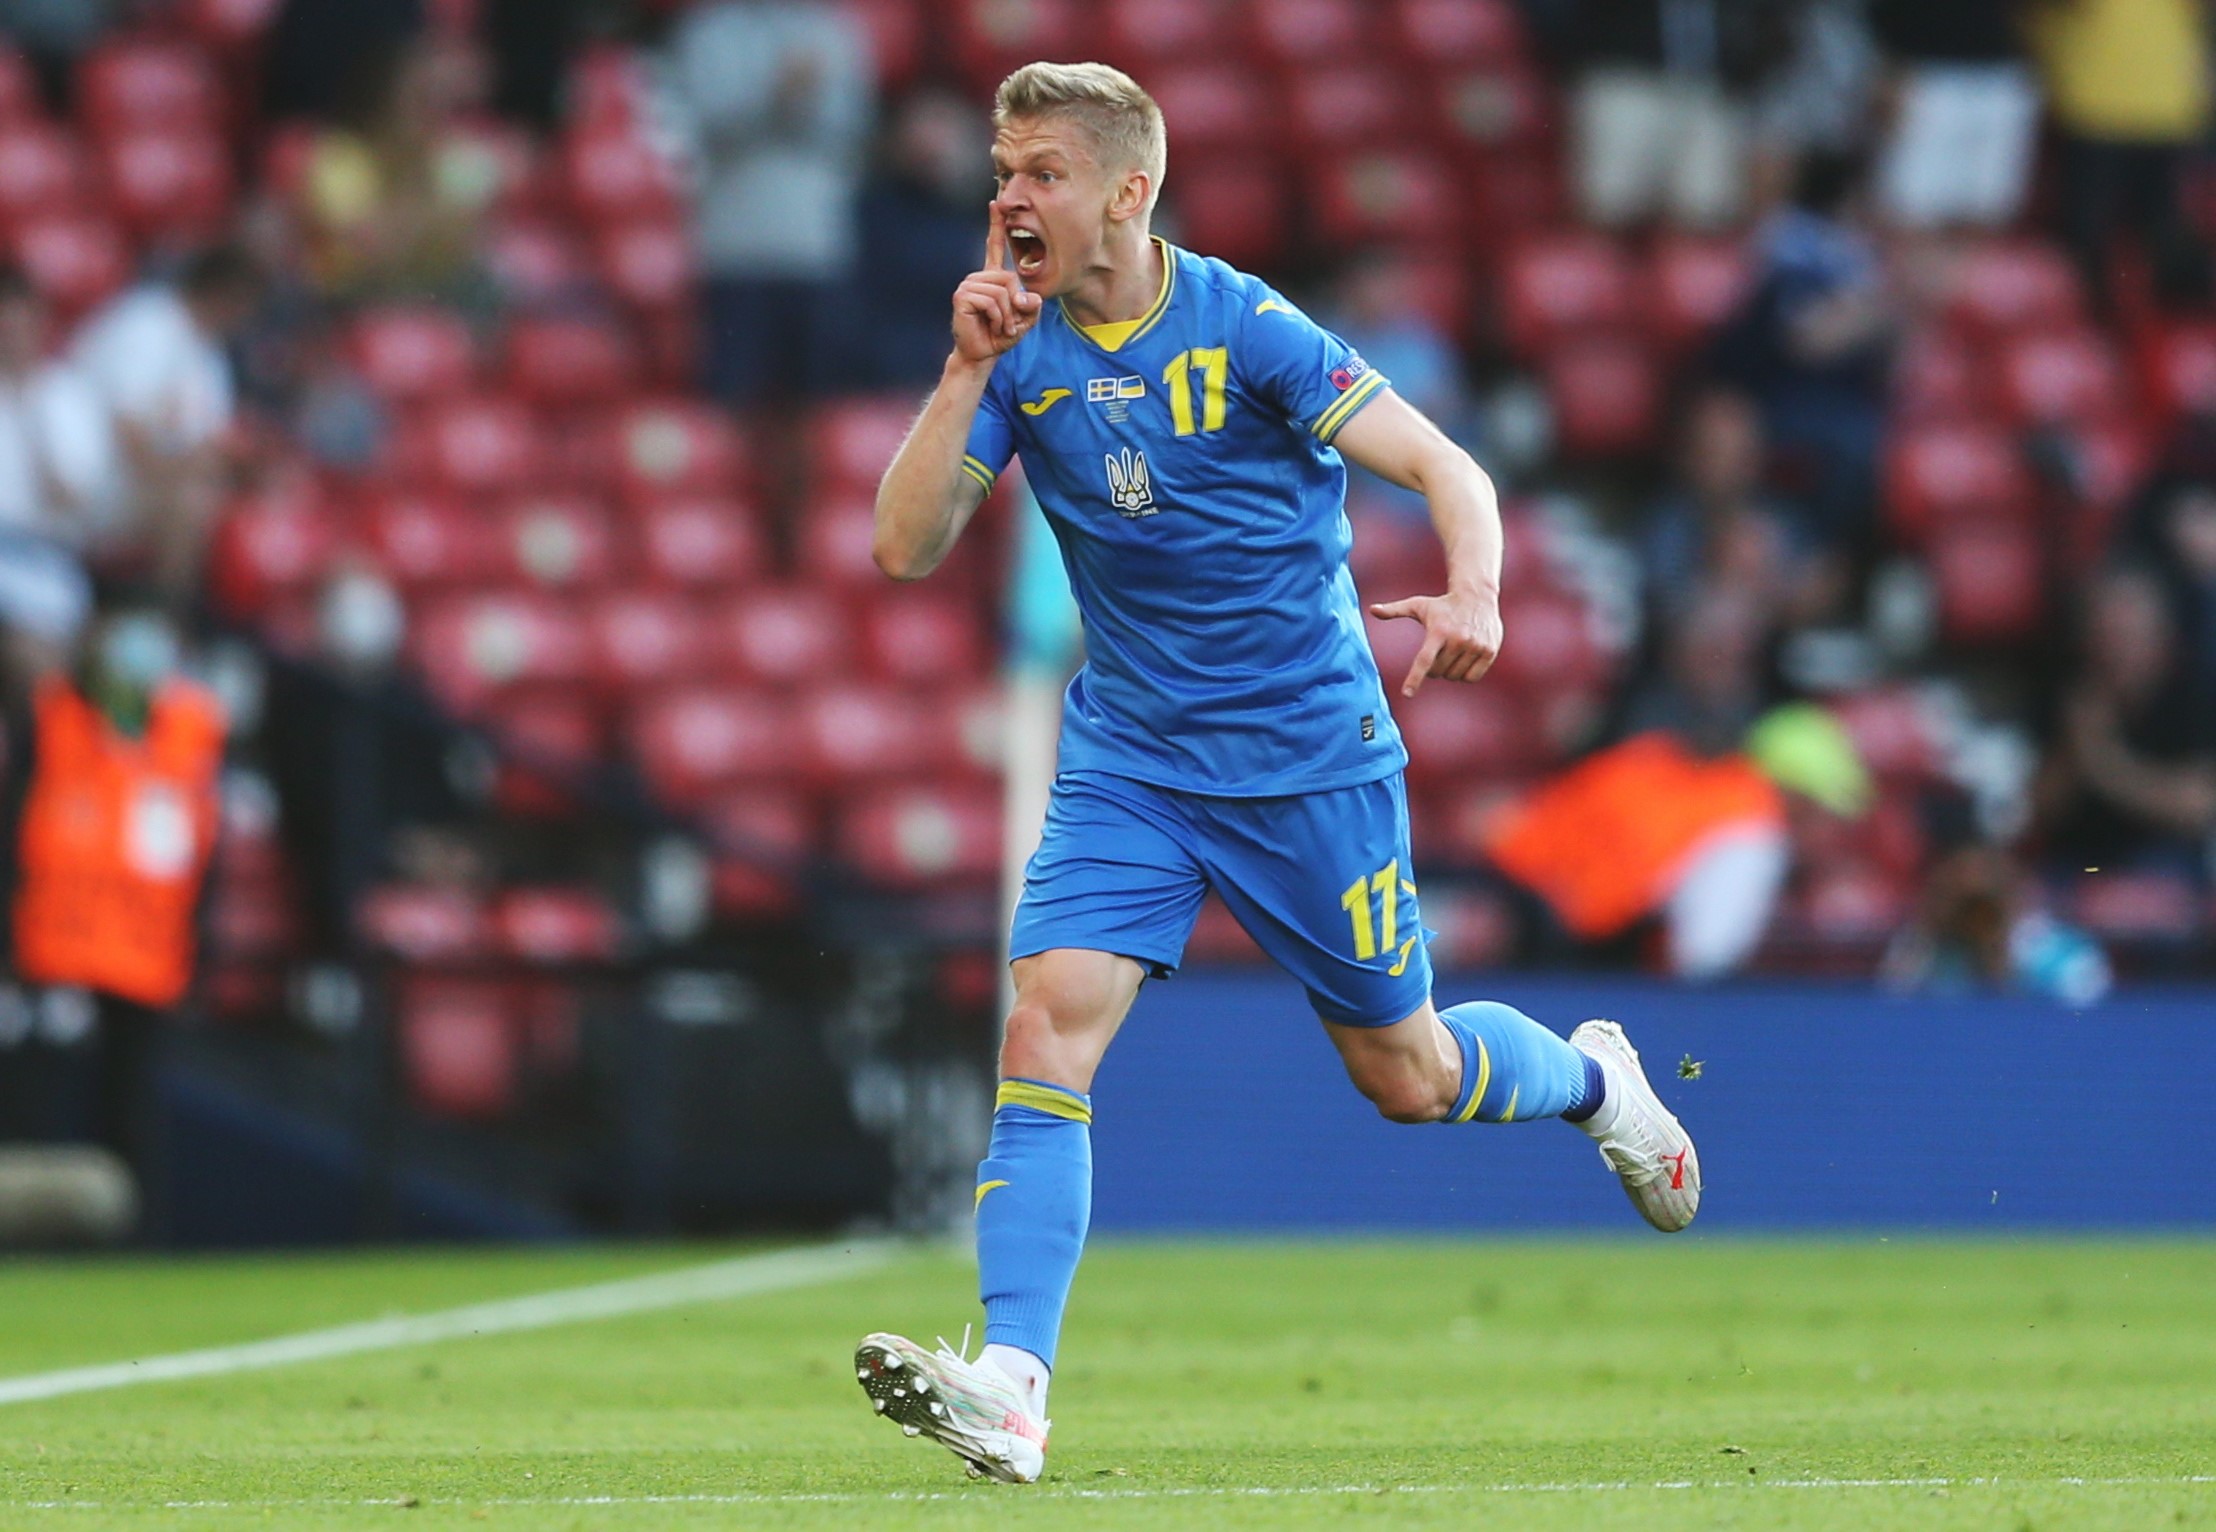 epa09312028 Oleksandr Zinchenko of Ukraine celebrates after scoring the 0-1 goal during the UEFA EURO 2020 round of 16 soccer match between Sweden and Ukraine in Glasgow, Britain, 29 June 2021.  EPA/Robert Perry / POOL (RESTRICTIONS: For editorial news reporting purposes only. Images must appear as still images and must not emulate match action video footage. Photographs published in online publications shall have an interval of at least 20 seconds between the posting.)